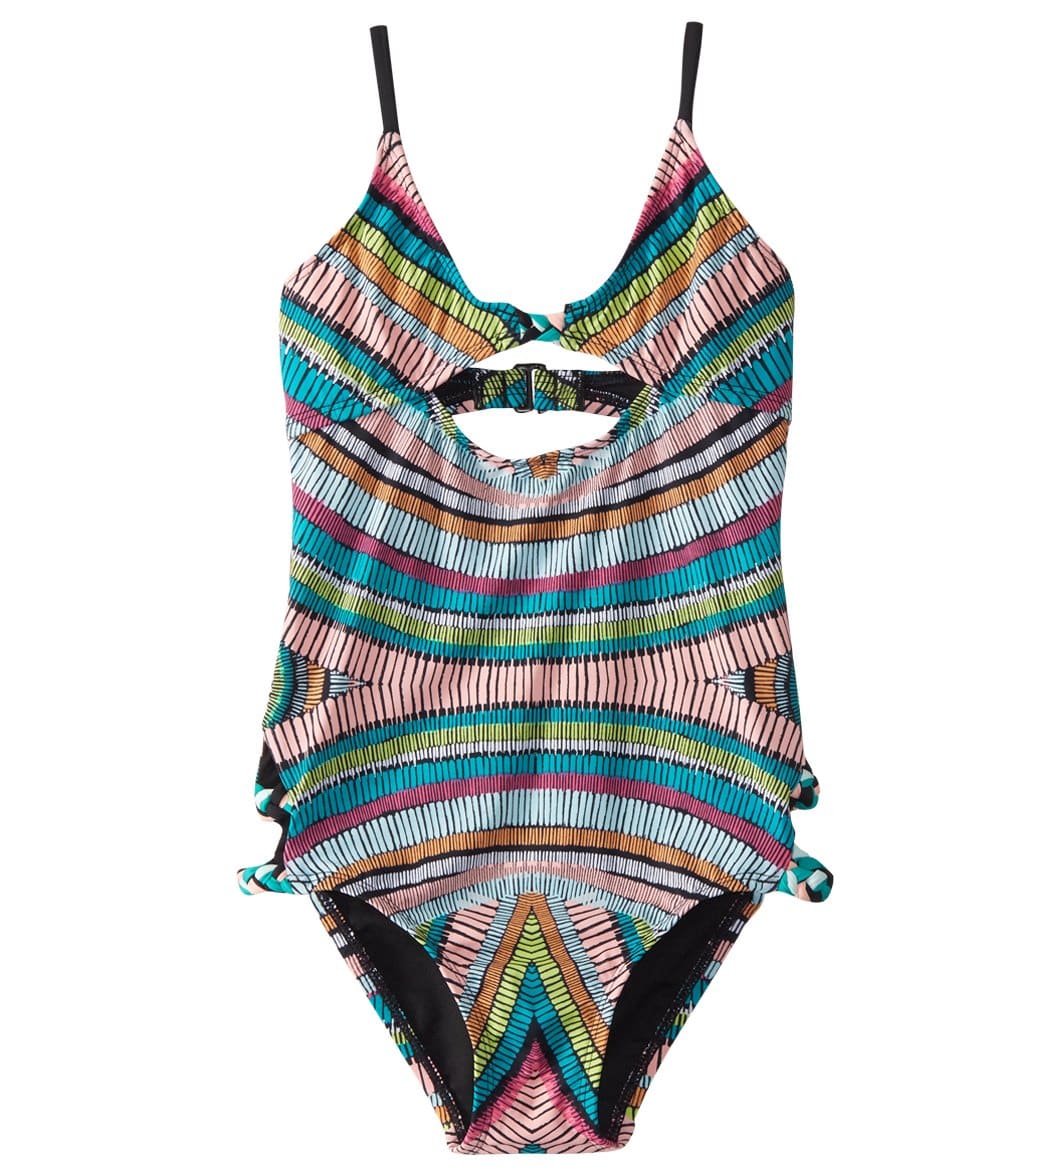 Hobie Girls' Weave Rider One Piece Swimsuit (Big Kid) at SwimOutlet.com